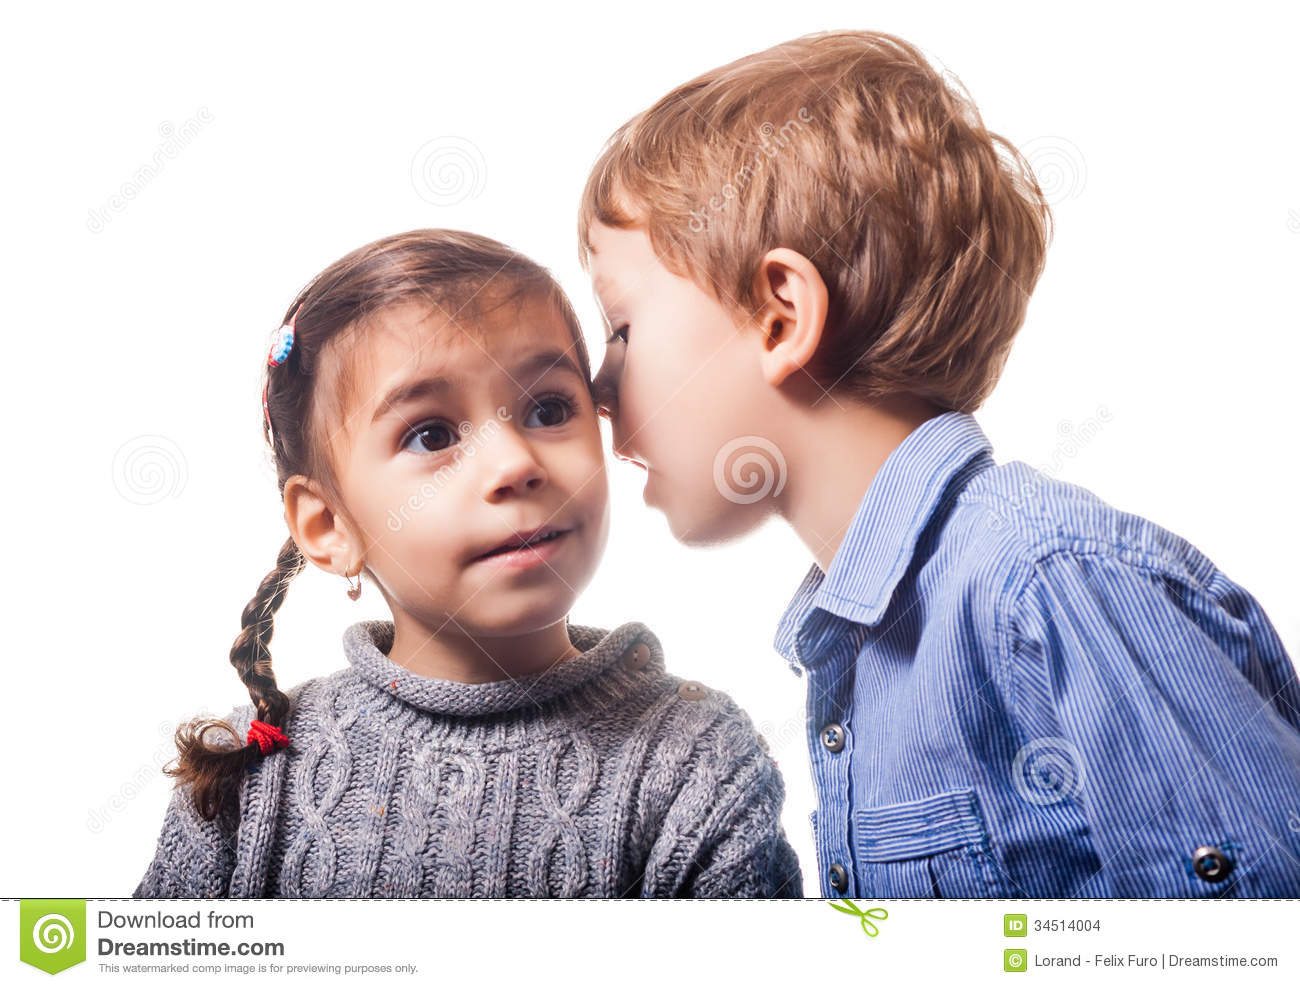 Boy Whispering To A Girl On White Background 